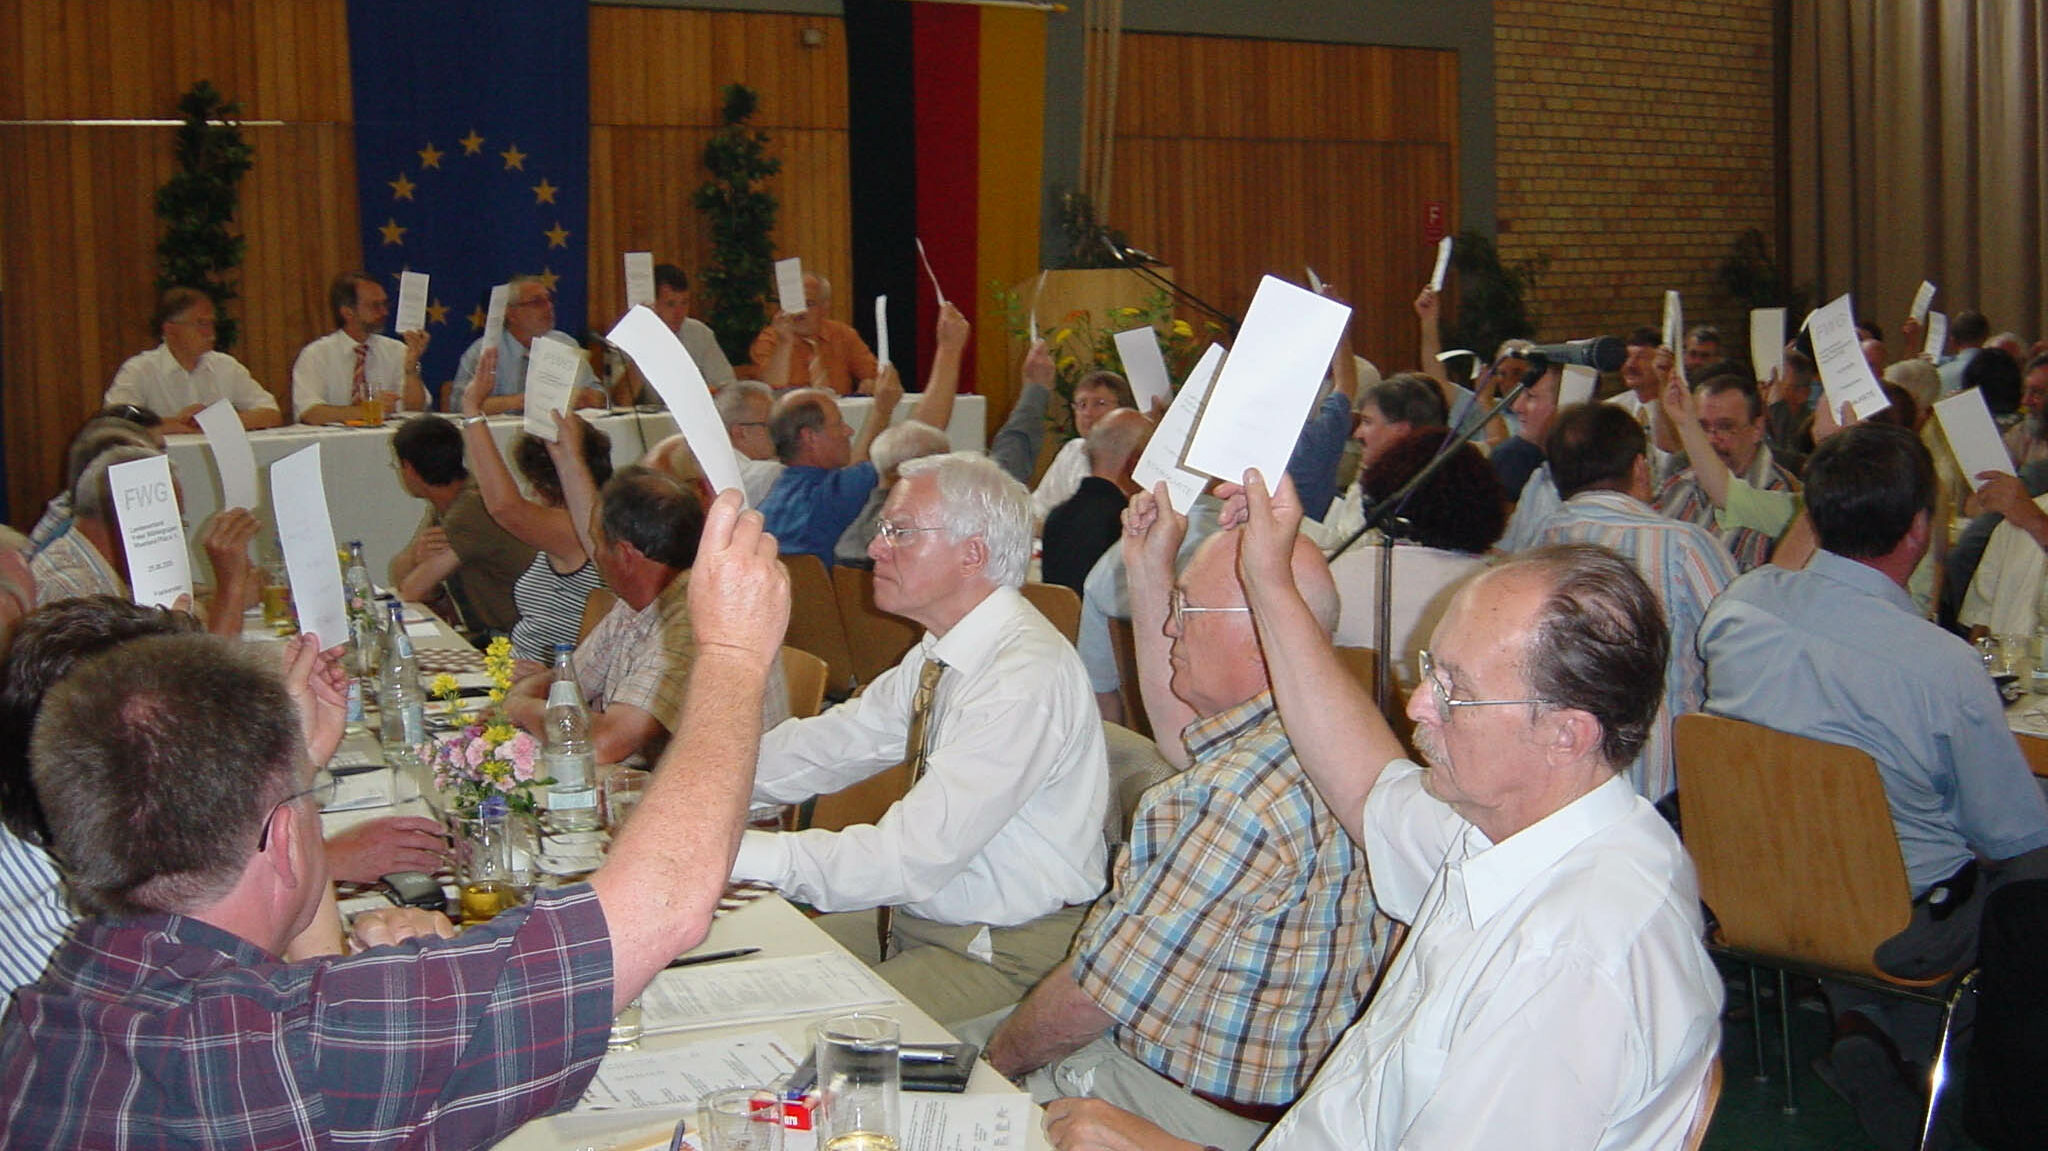 Old men, and a very few women, are sitting together in a large room.  They held white papers and participated in the vote.